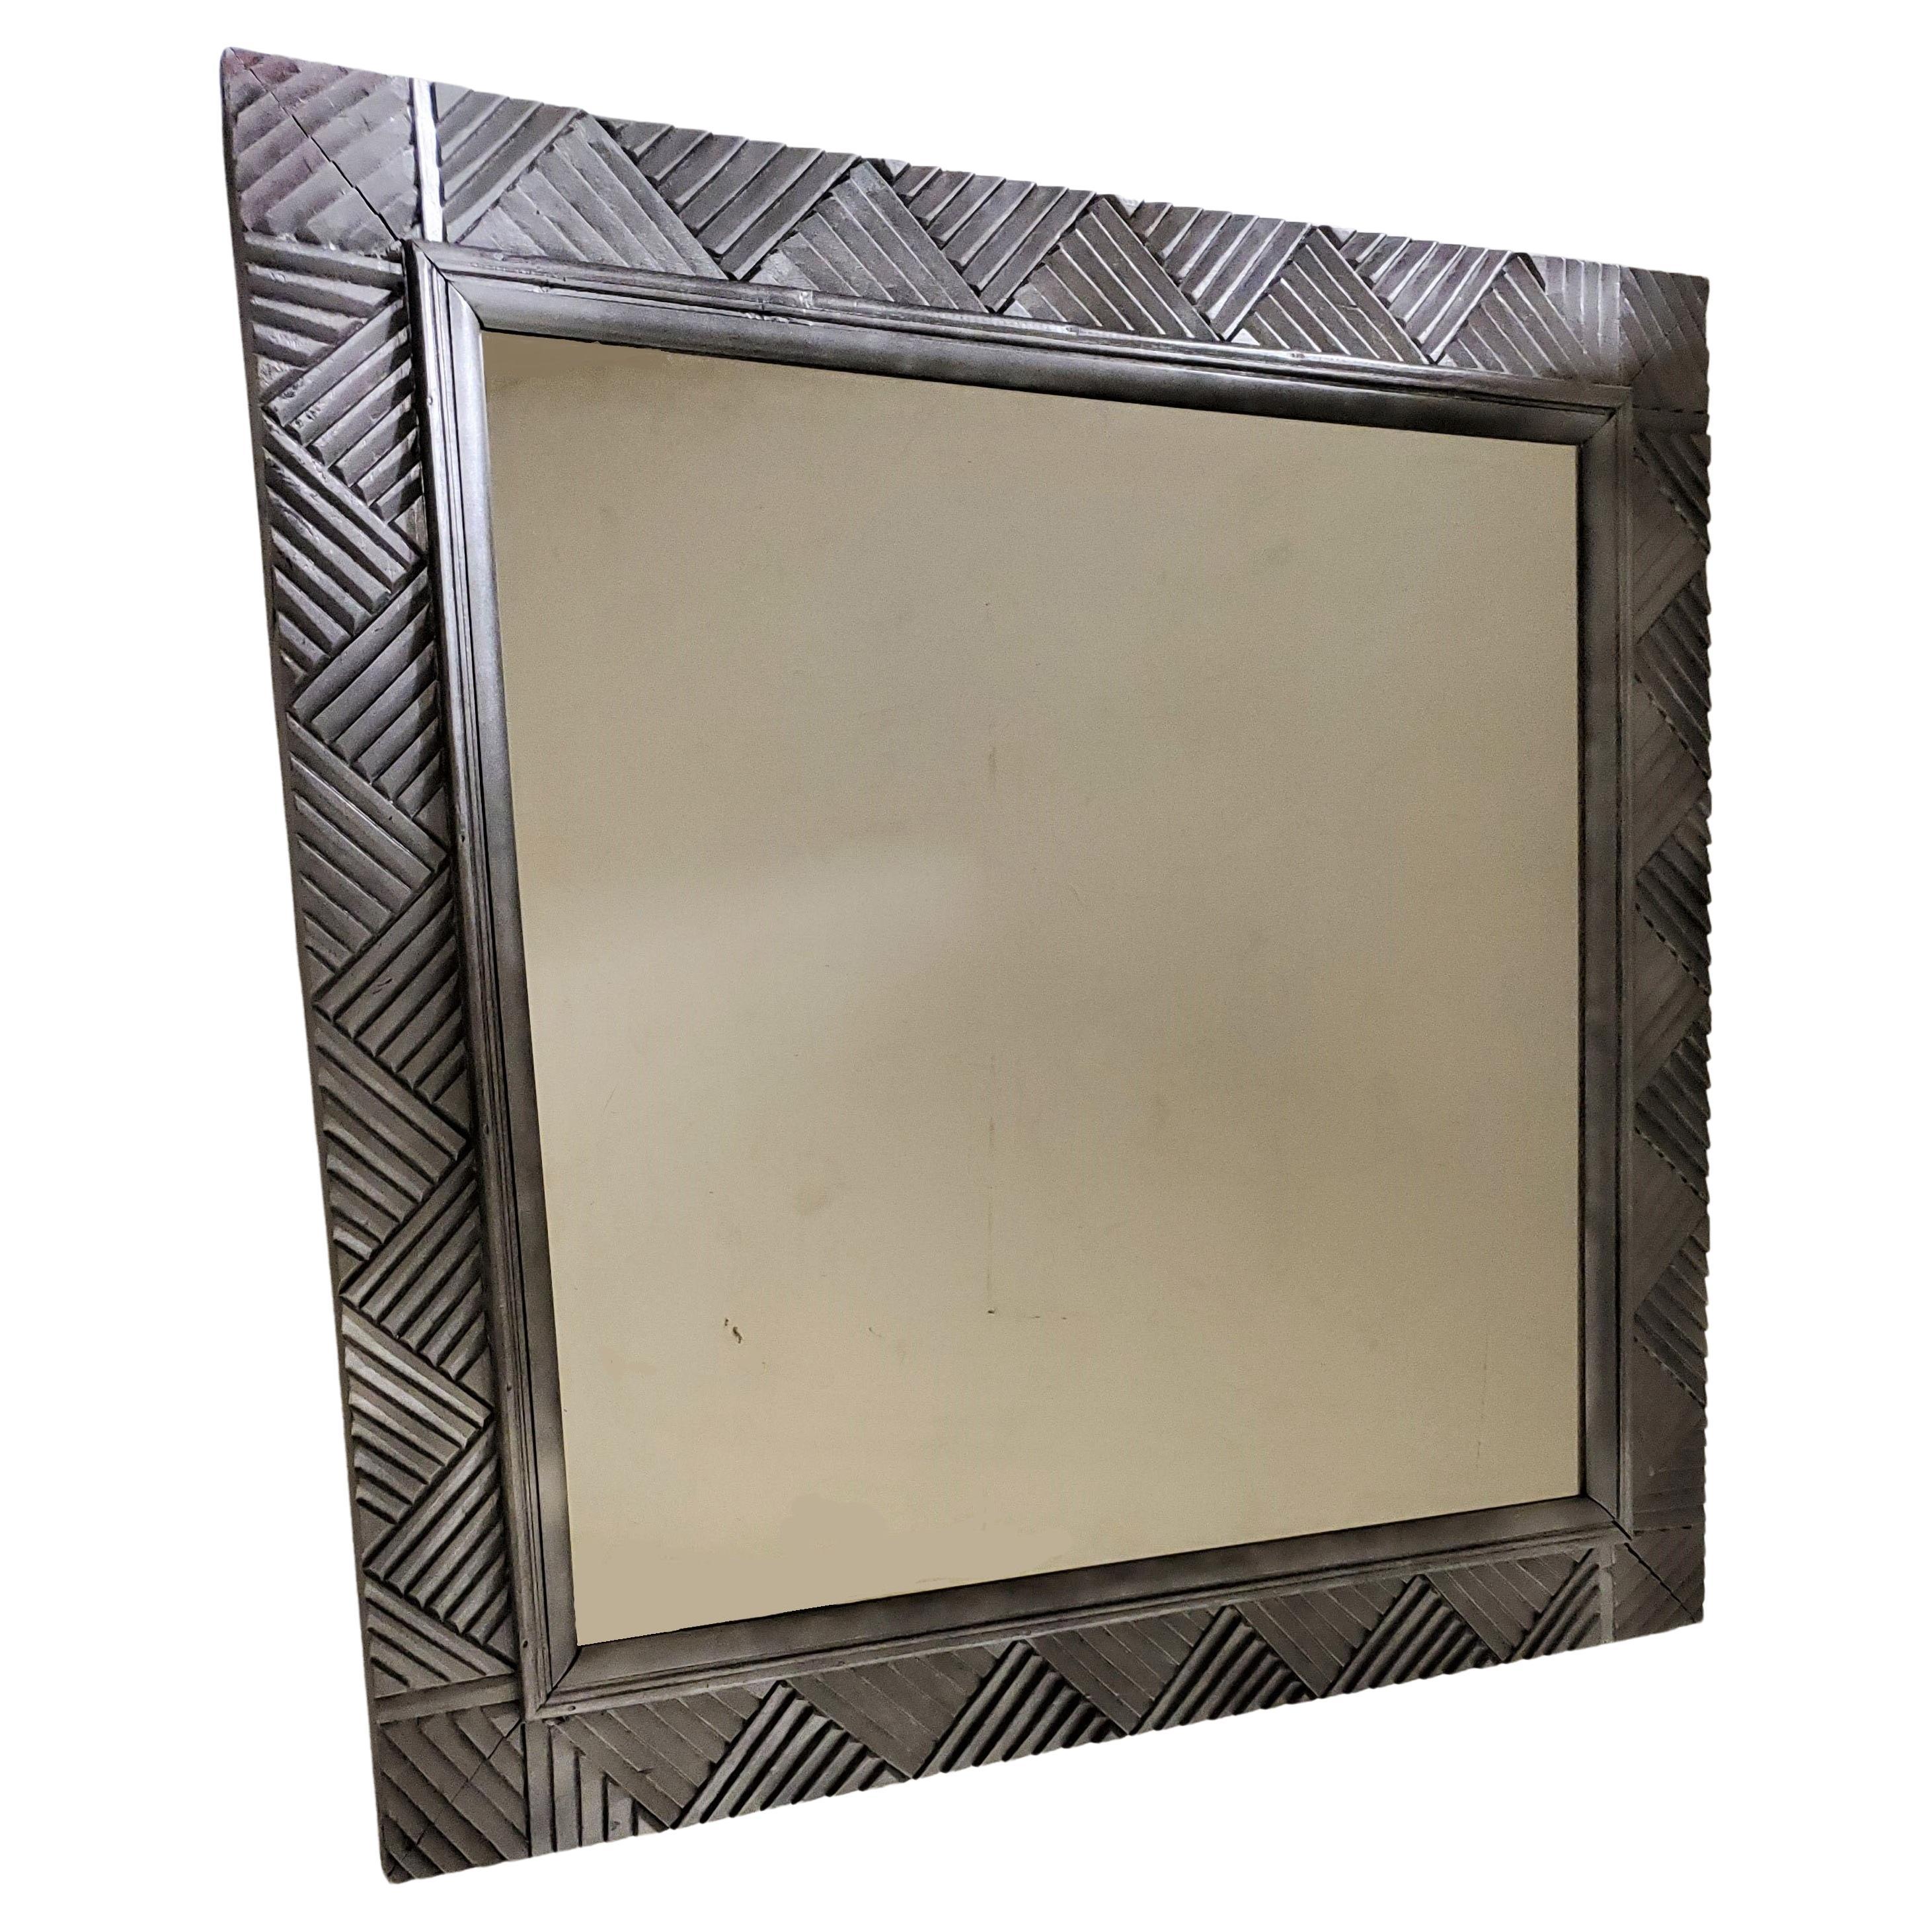 An impressive and decorative carved wood wall mirror of overall geometric motif. 
Square shape with a satin silvered finish and 3-D textured effect with triangular, chevron, stepped patterns.
The perfect size for over a fireplace mantle, in a